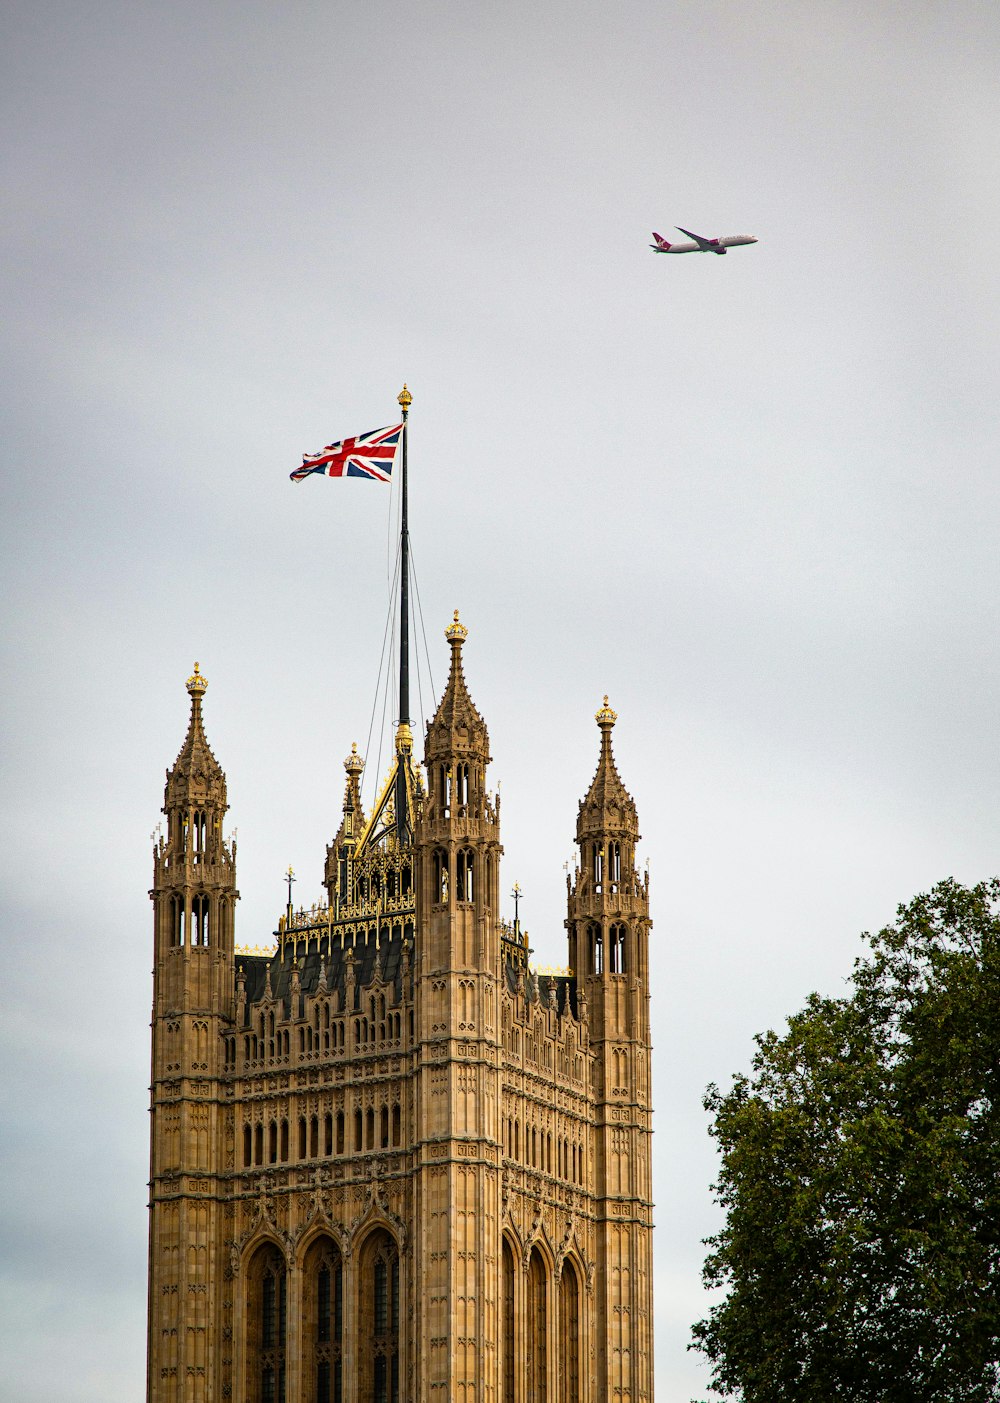 a plane flying over a large building with a flag on top